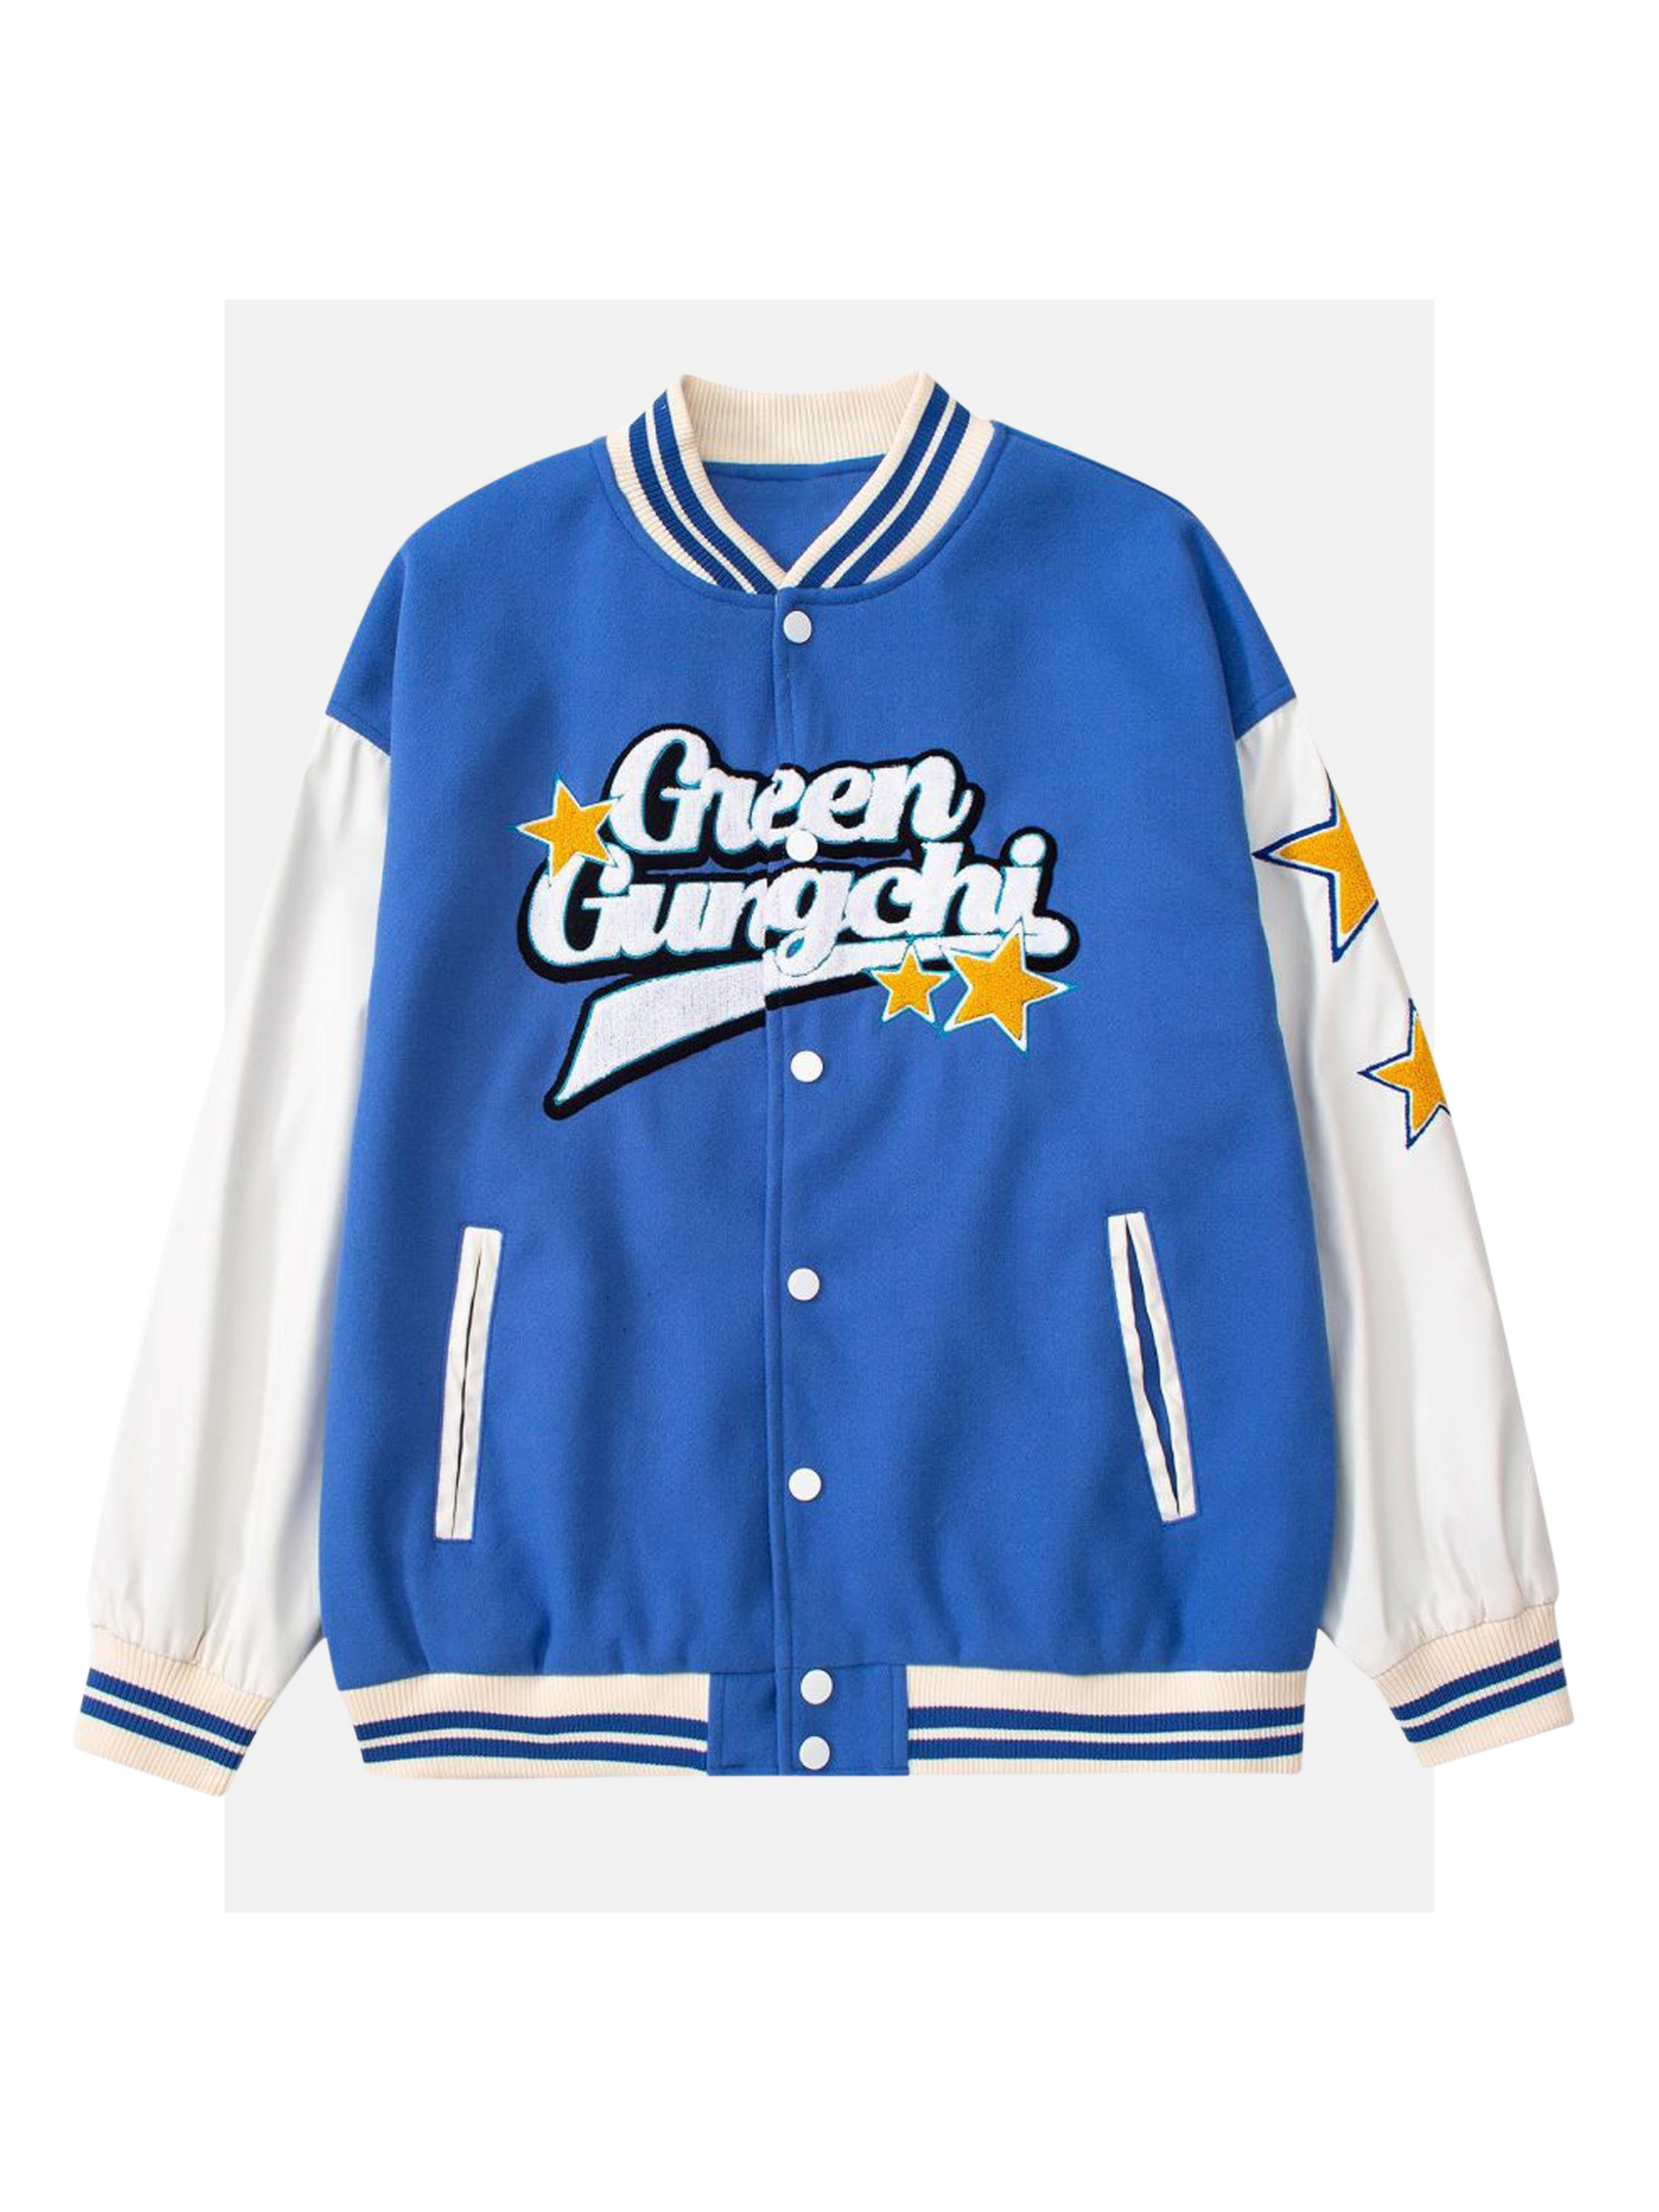 LUXENFY™ - American Street Embroidered Letters Baseball Jacket luxenfy.com